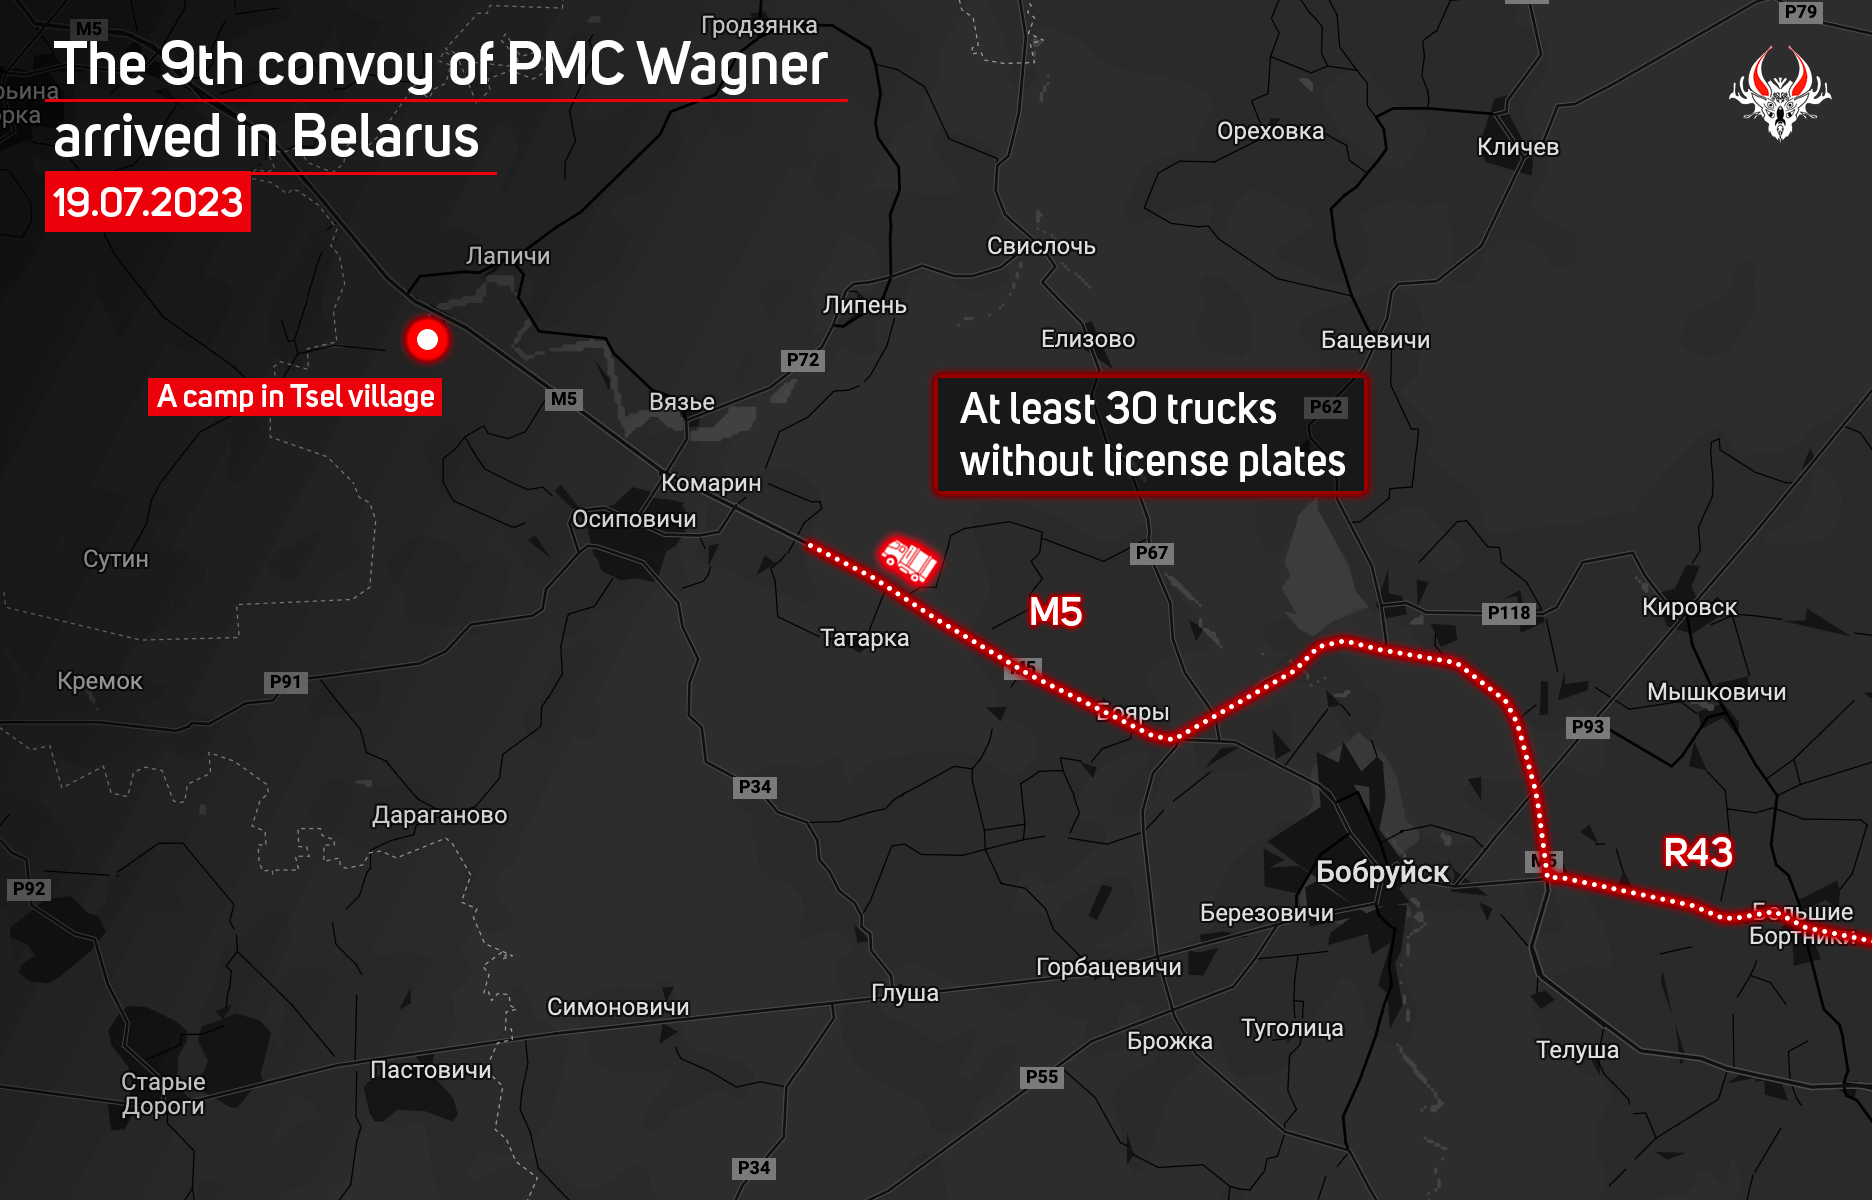 The 9th convoy of PMC Wagner arrived in Belarus